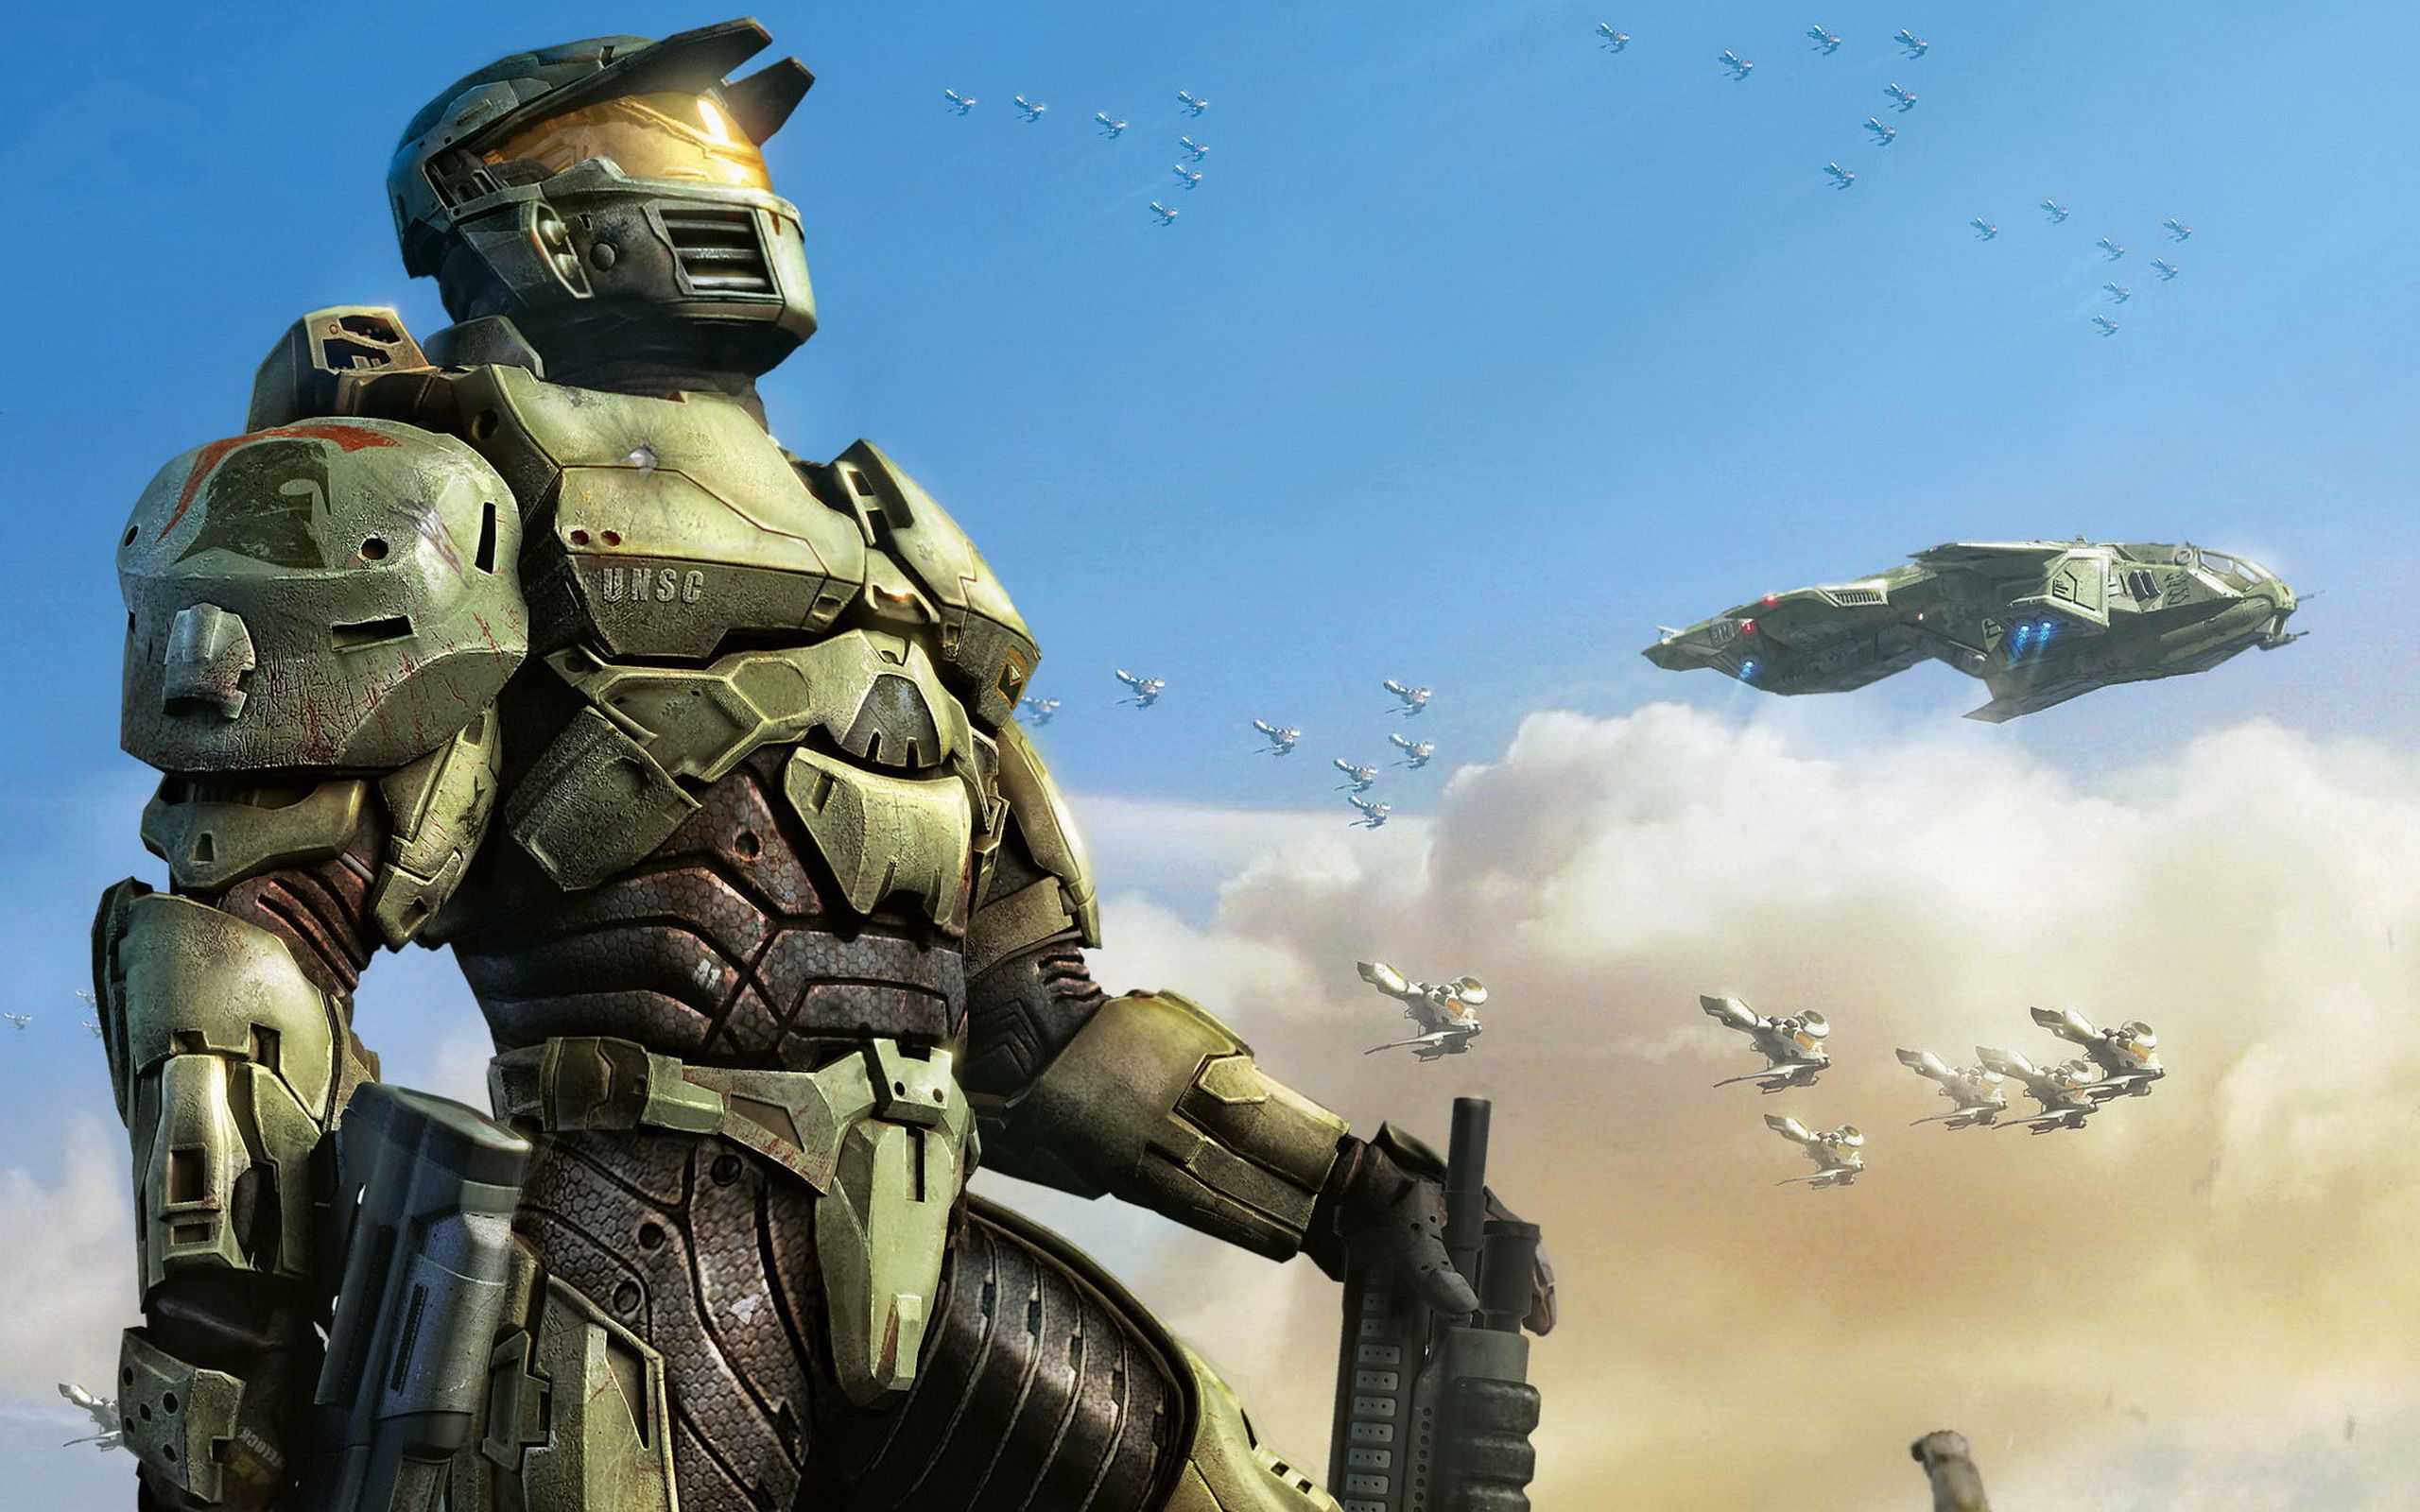 Free Cool Halo Spartan Images On Your Ipad - Halo 1 Master Chief -  2560x1600 Wallpaper 